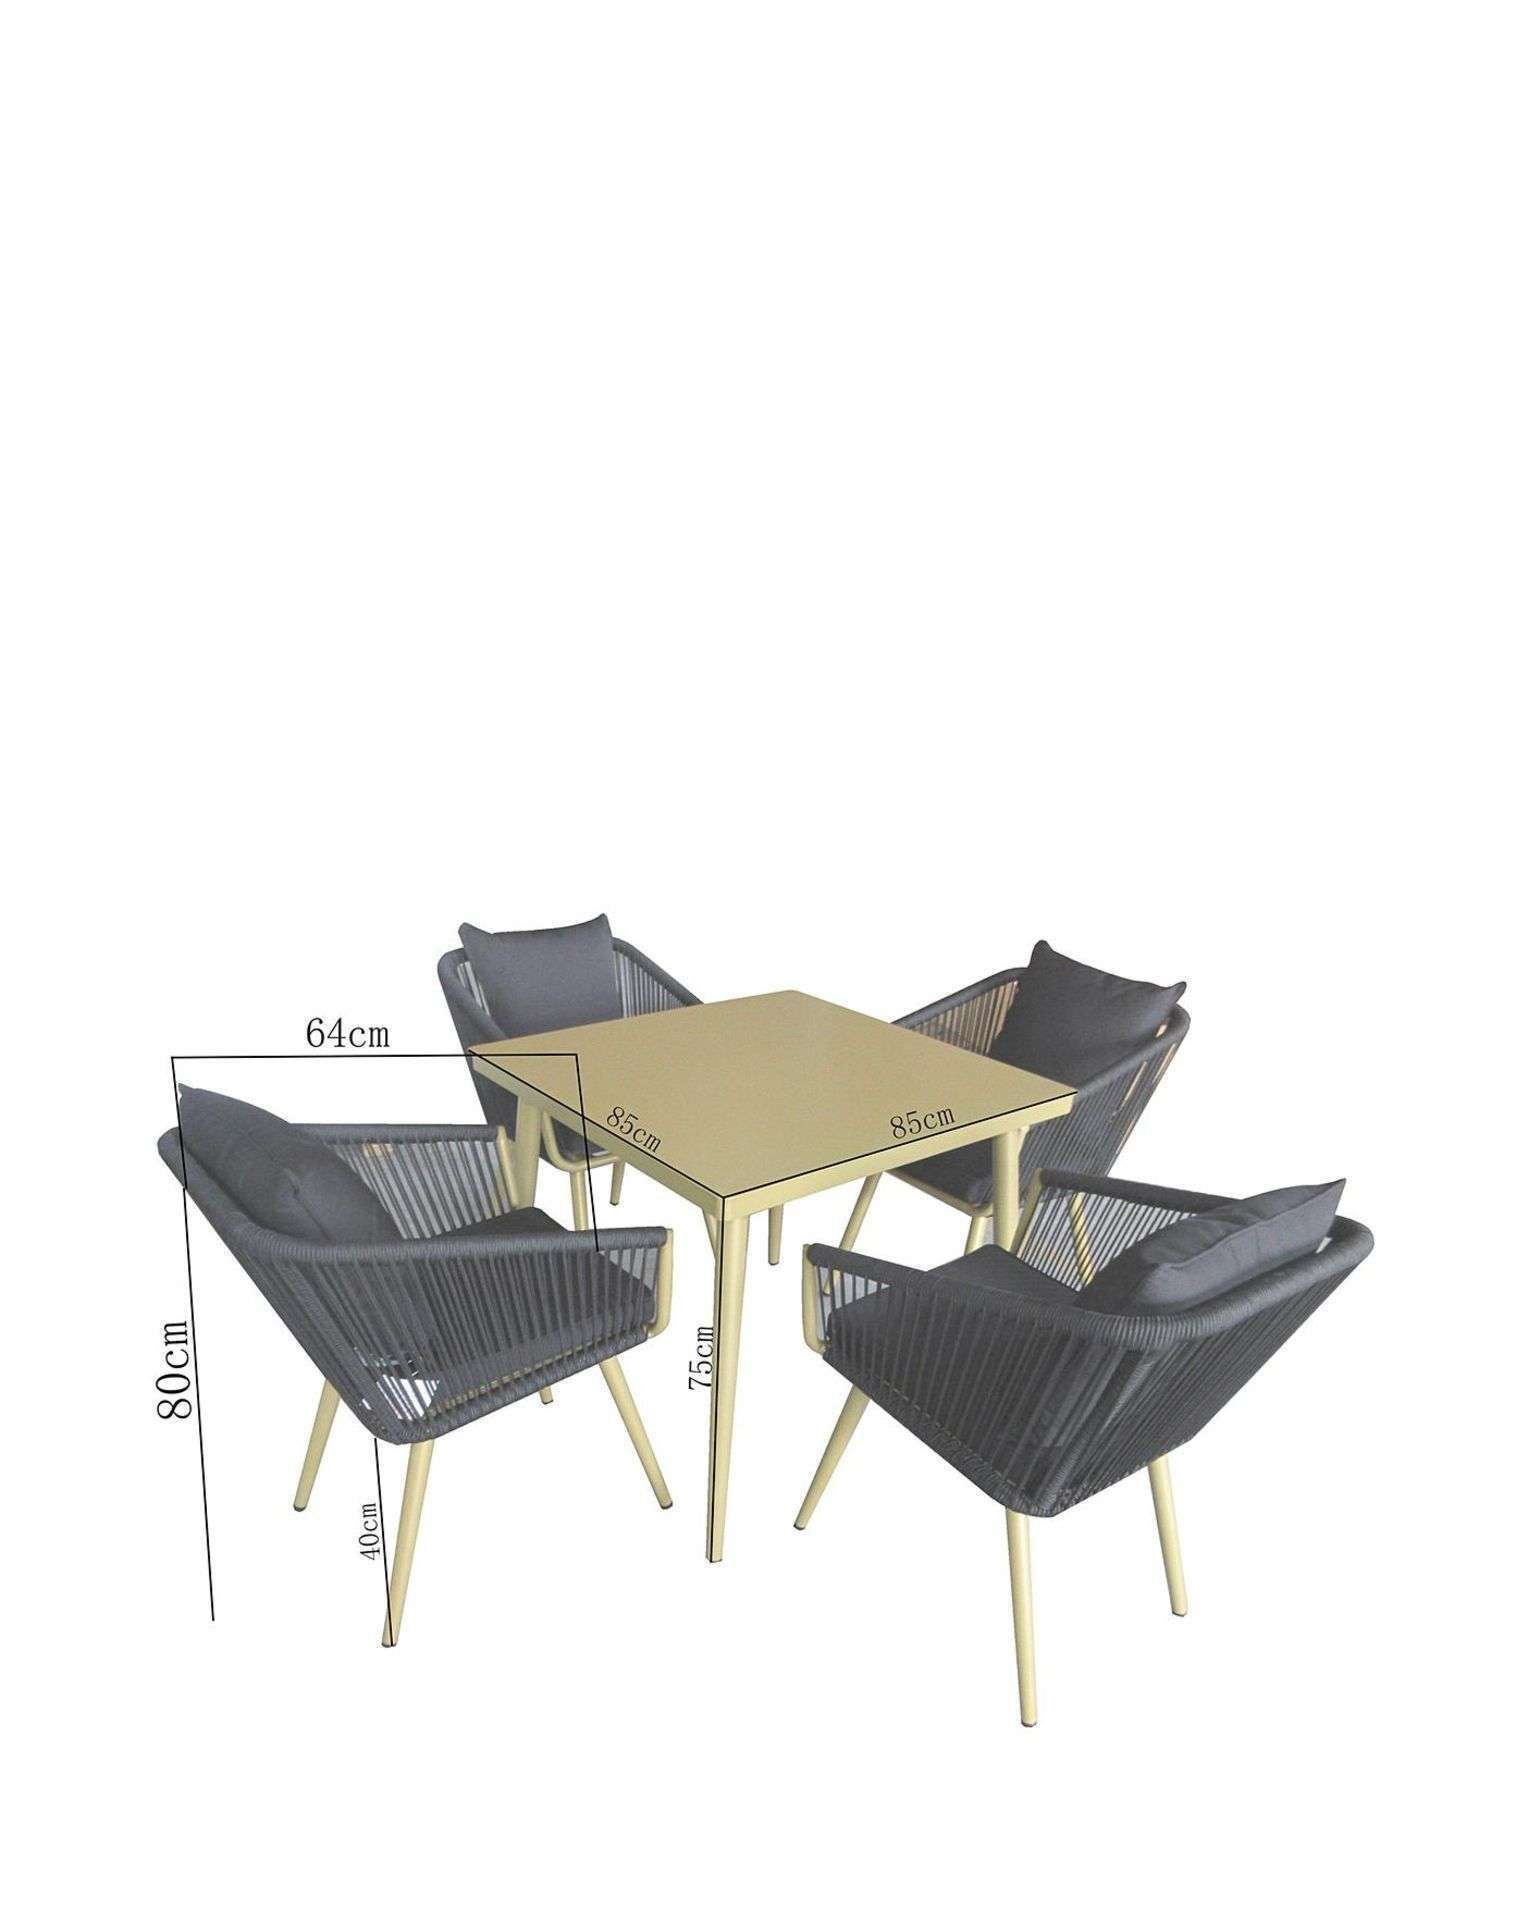 Trade Lot 4 x New & Packaged Joanna Hope Naya 4 Seater Dining Sets. RRP £719 each. This Exclusive - Image 5 of 5